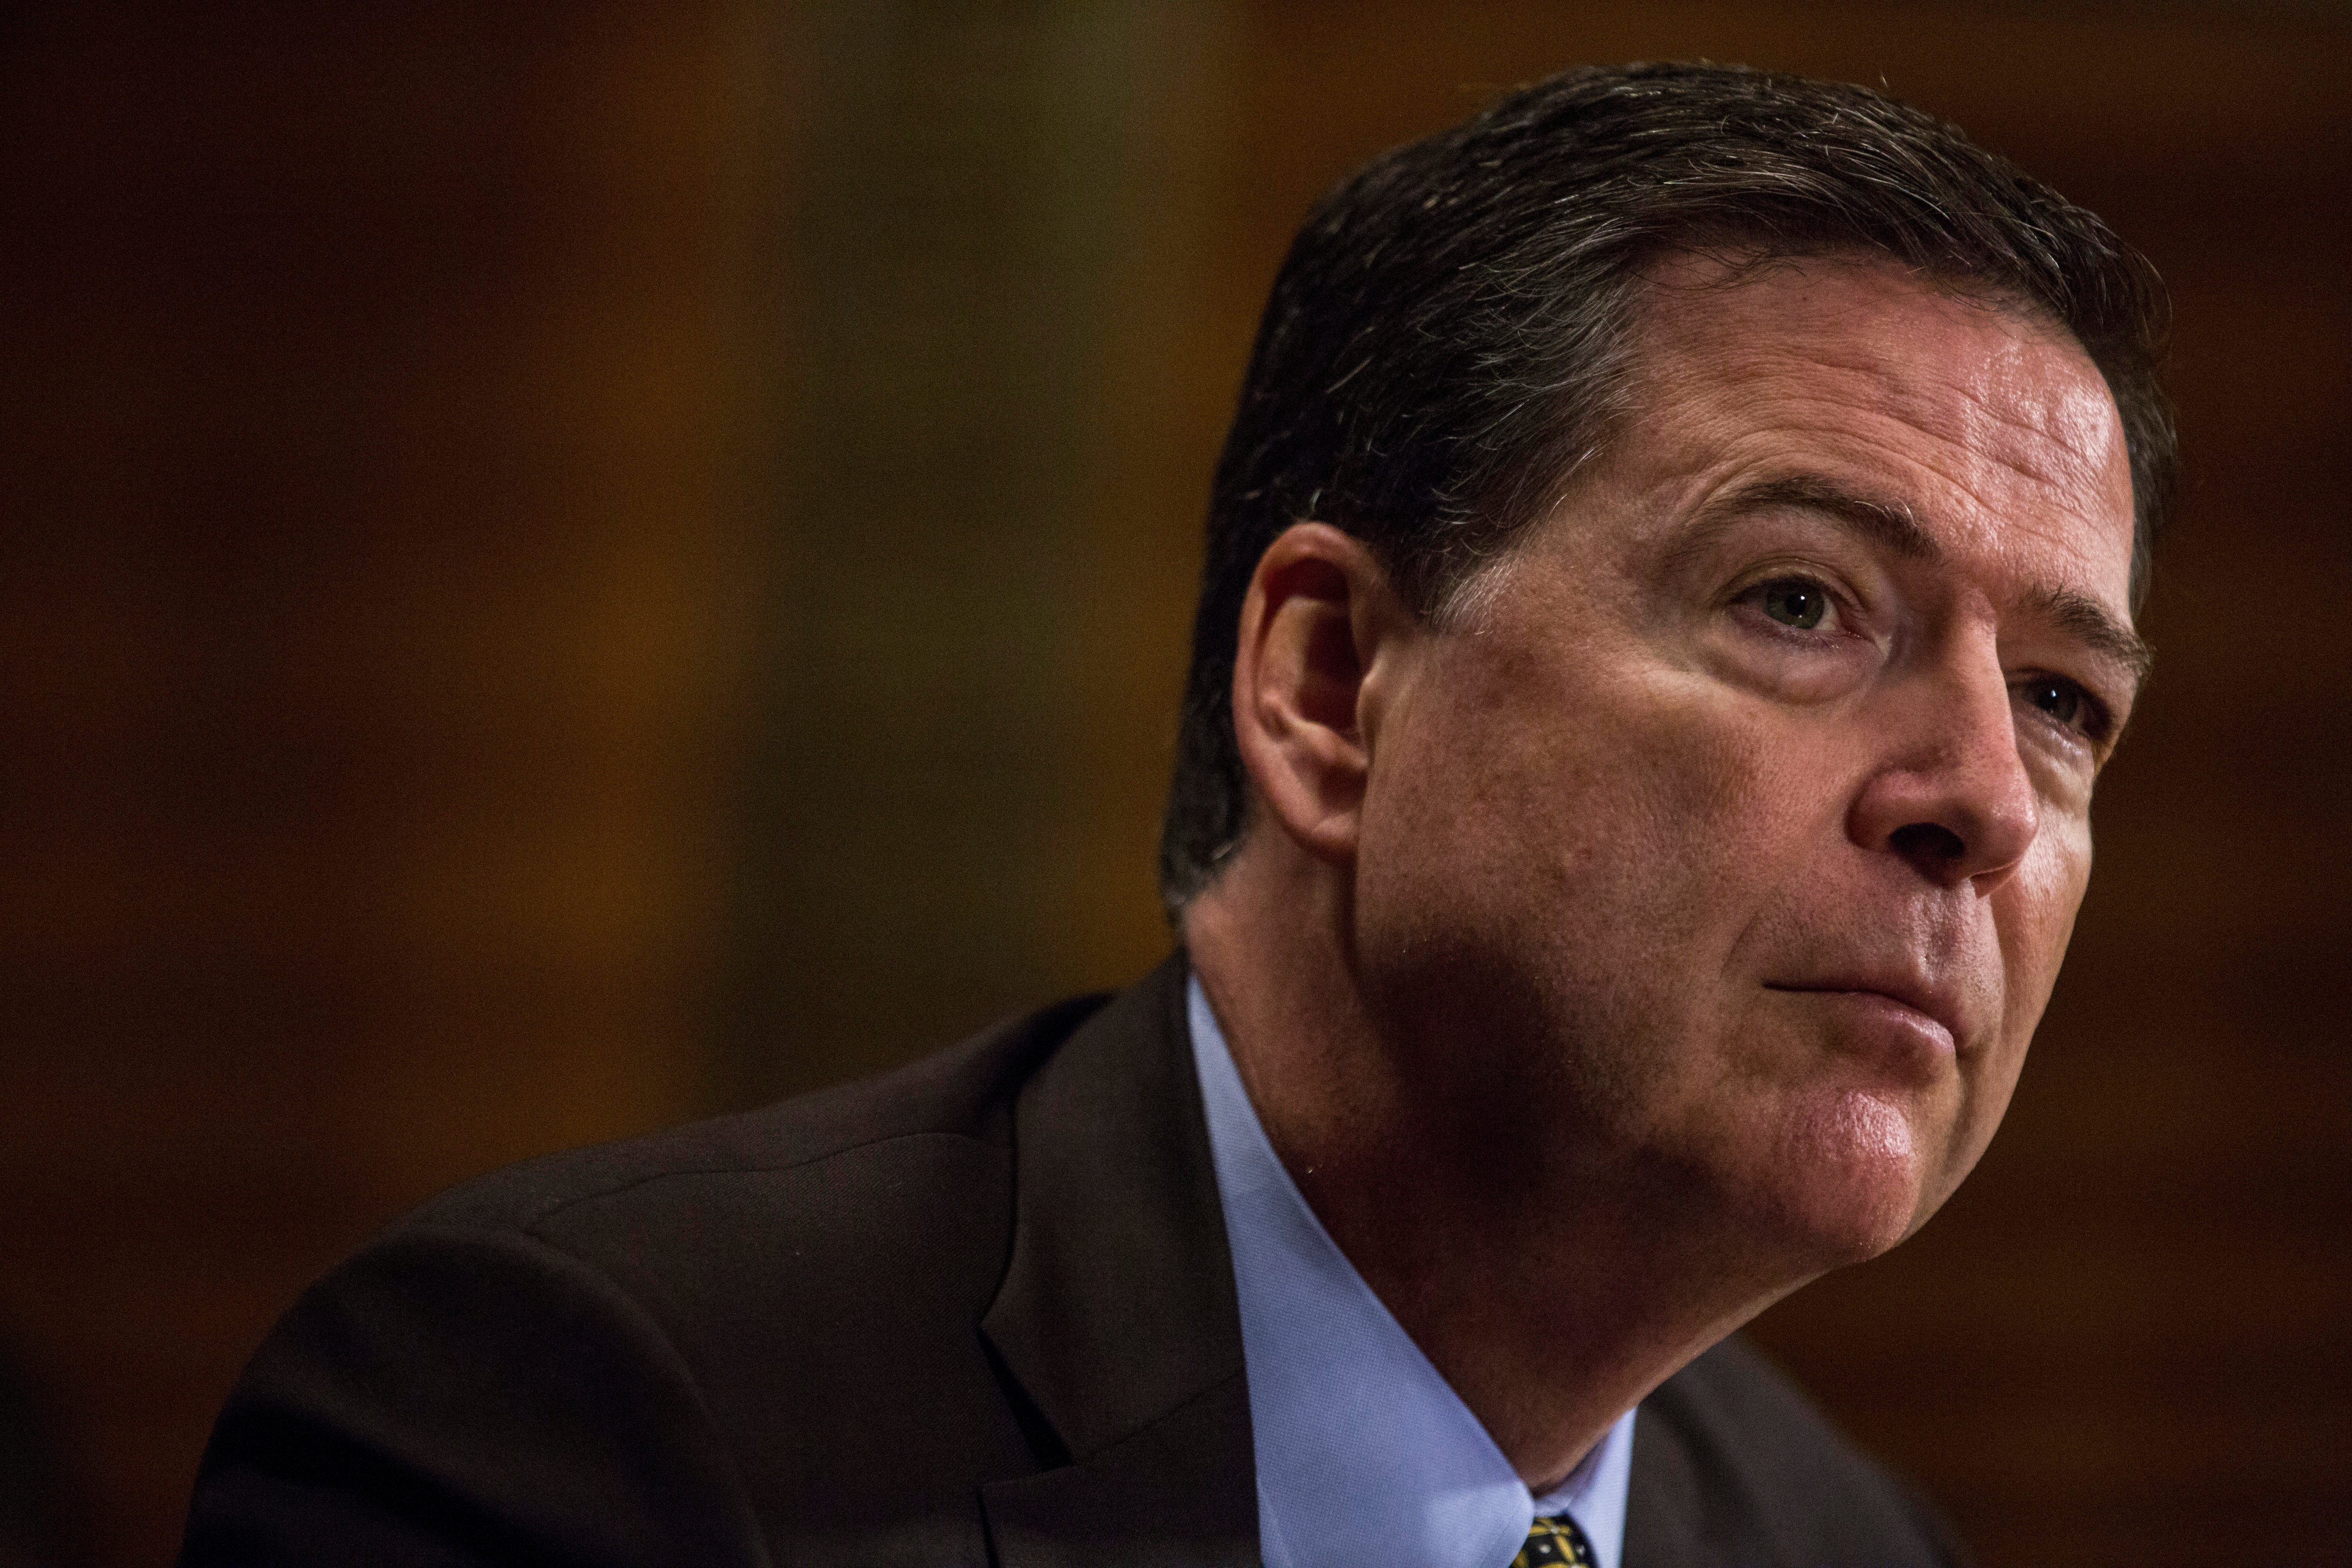 Director of the Federal Bureau of Investigation, James Comey testifies in front of the Senate Judiciary Committee during an oversight hearing on the FBI on Capitol Hill May 3, 2017 in Washington. (Zach Gibson&mdash;Getty Images)